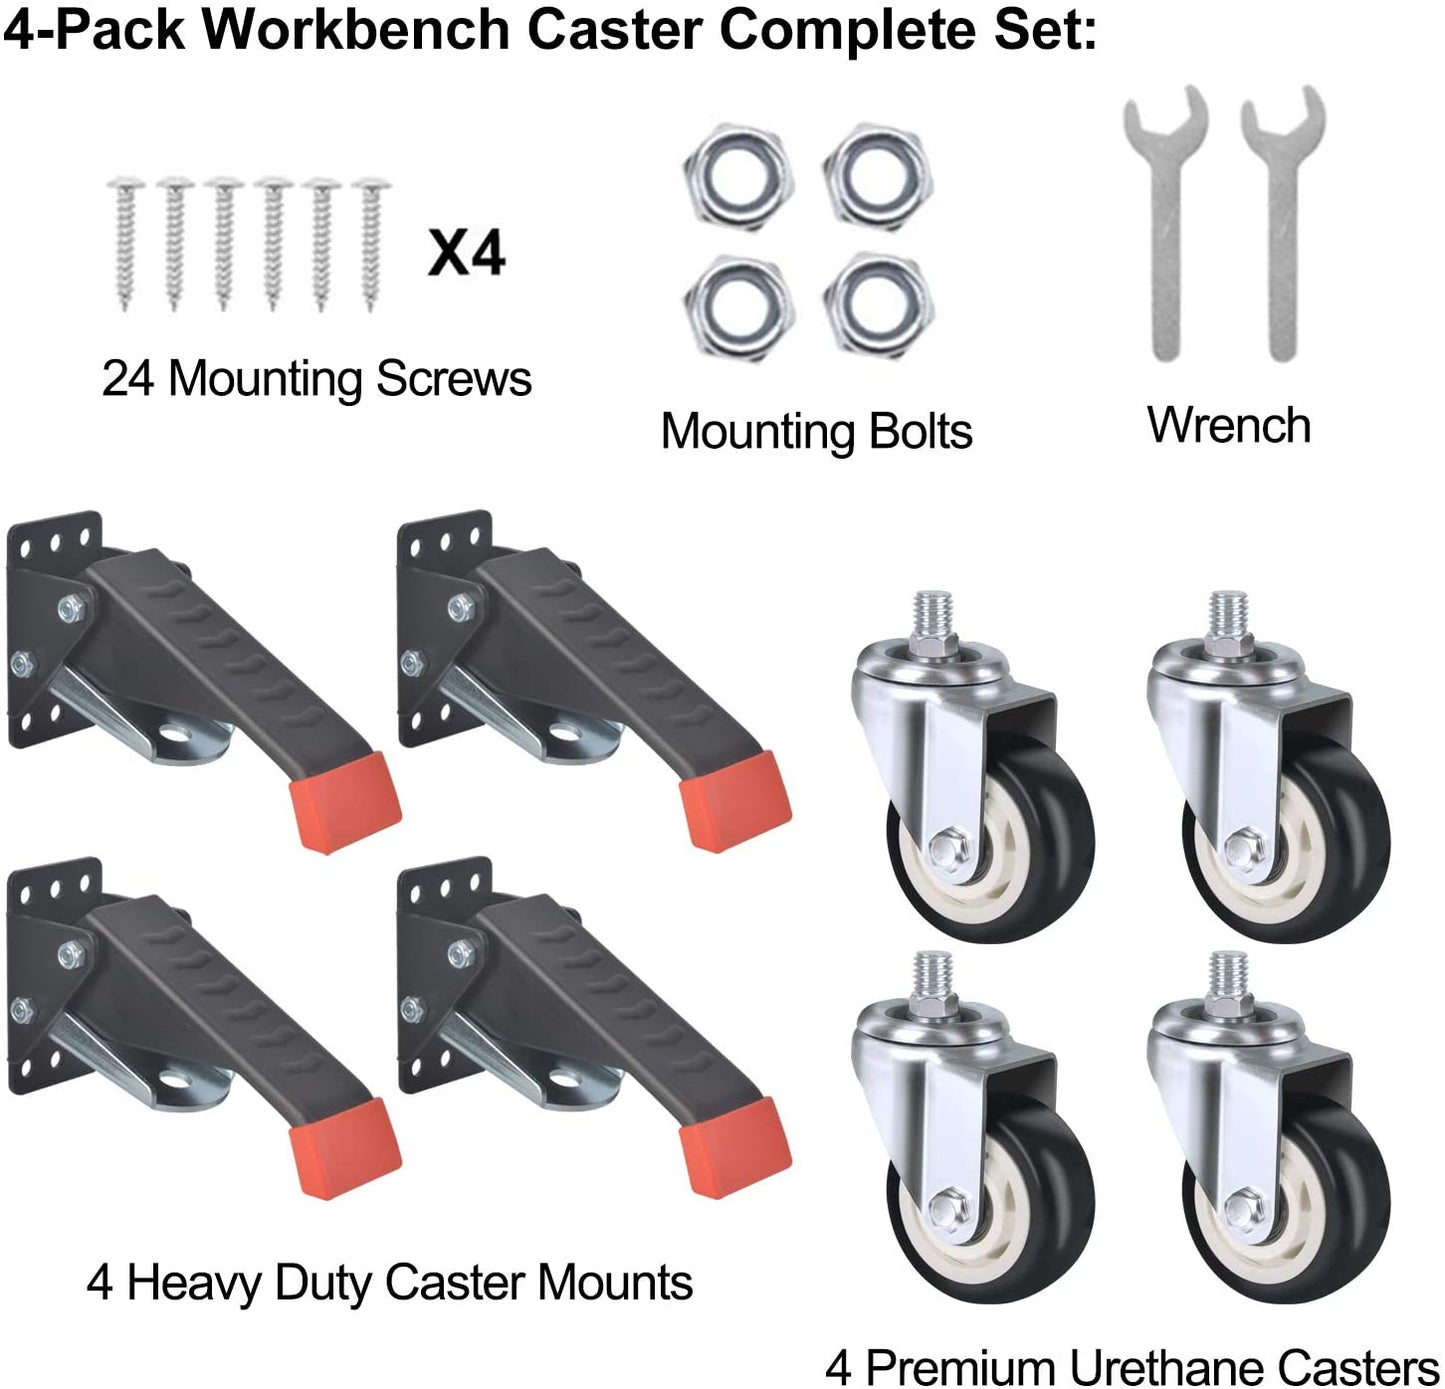 SPACEKEEPER Retractable Workbench Casters kit 880 Lbs -3 Inch Heavy Duty Retractable Casters Designed for Workbenches Machinery & Tables, 4 Packs